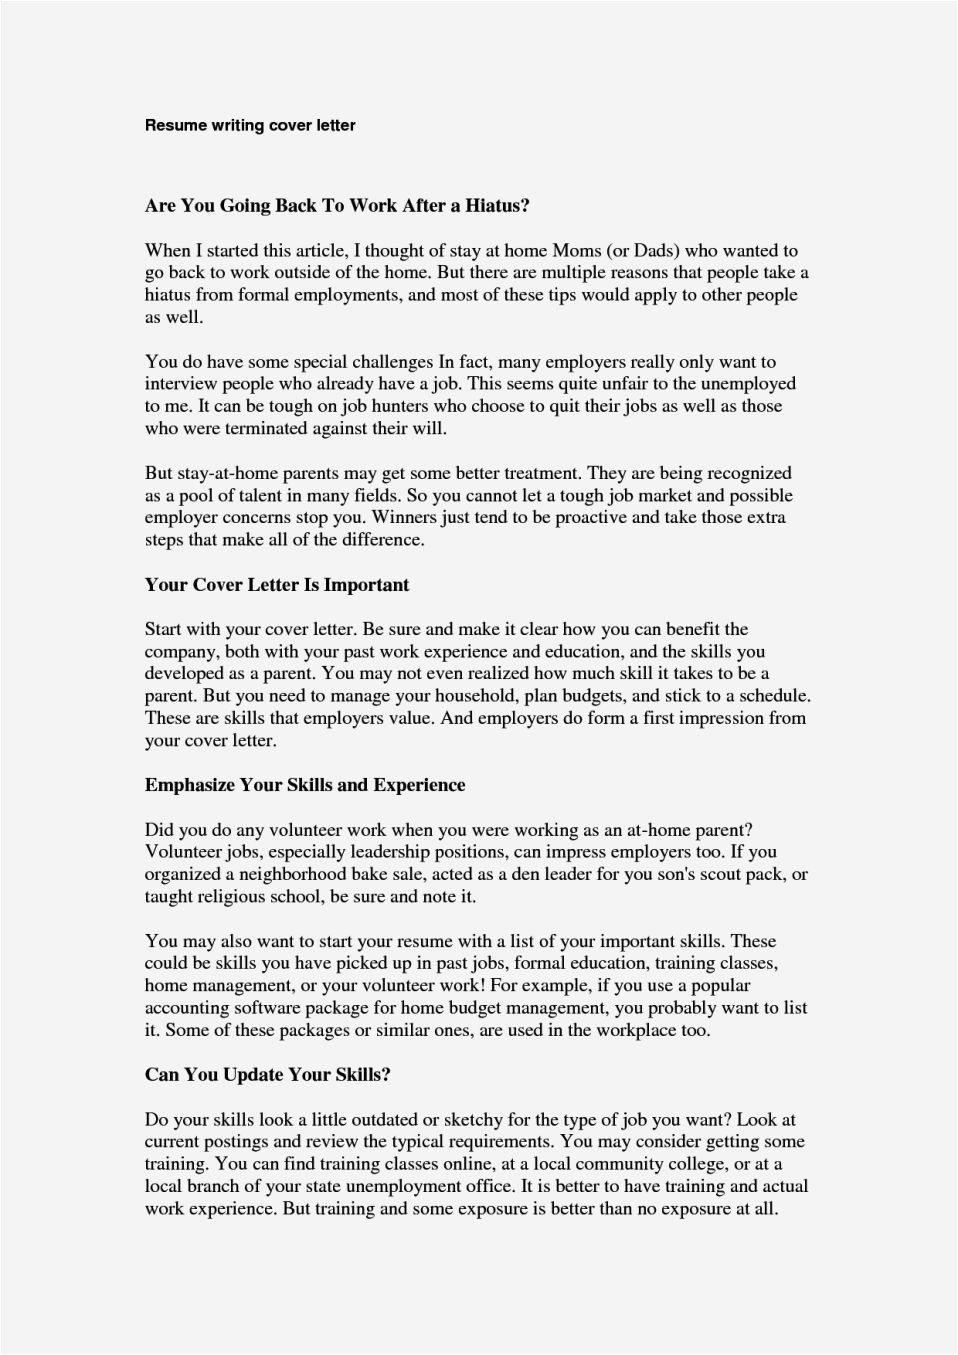 Cover Letter Examples for Stay at Home Moms Example Cover Letter From A Stay at Home Mom Resume